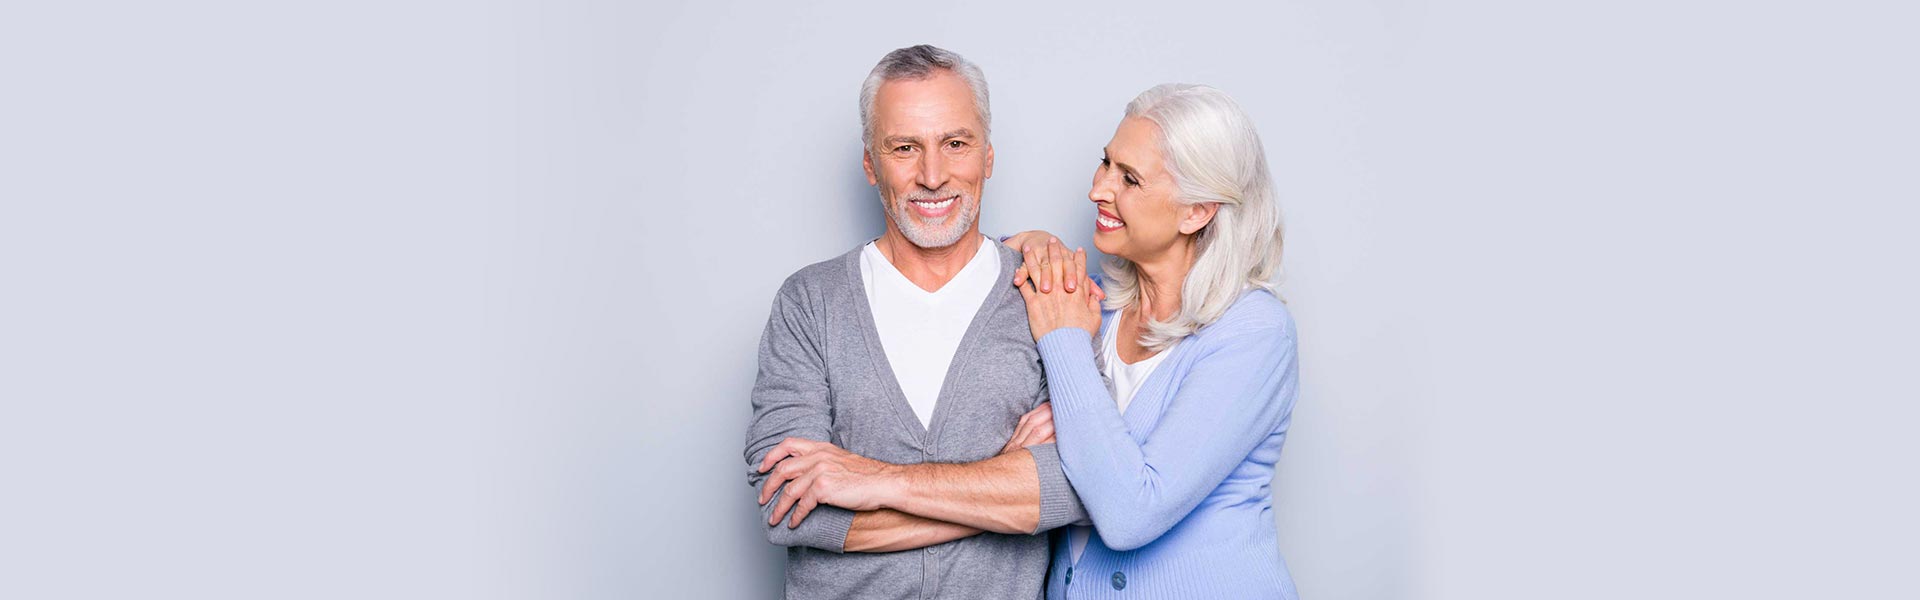 3 Reasons Why Dental Implants Are Called the “Gold Standard”